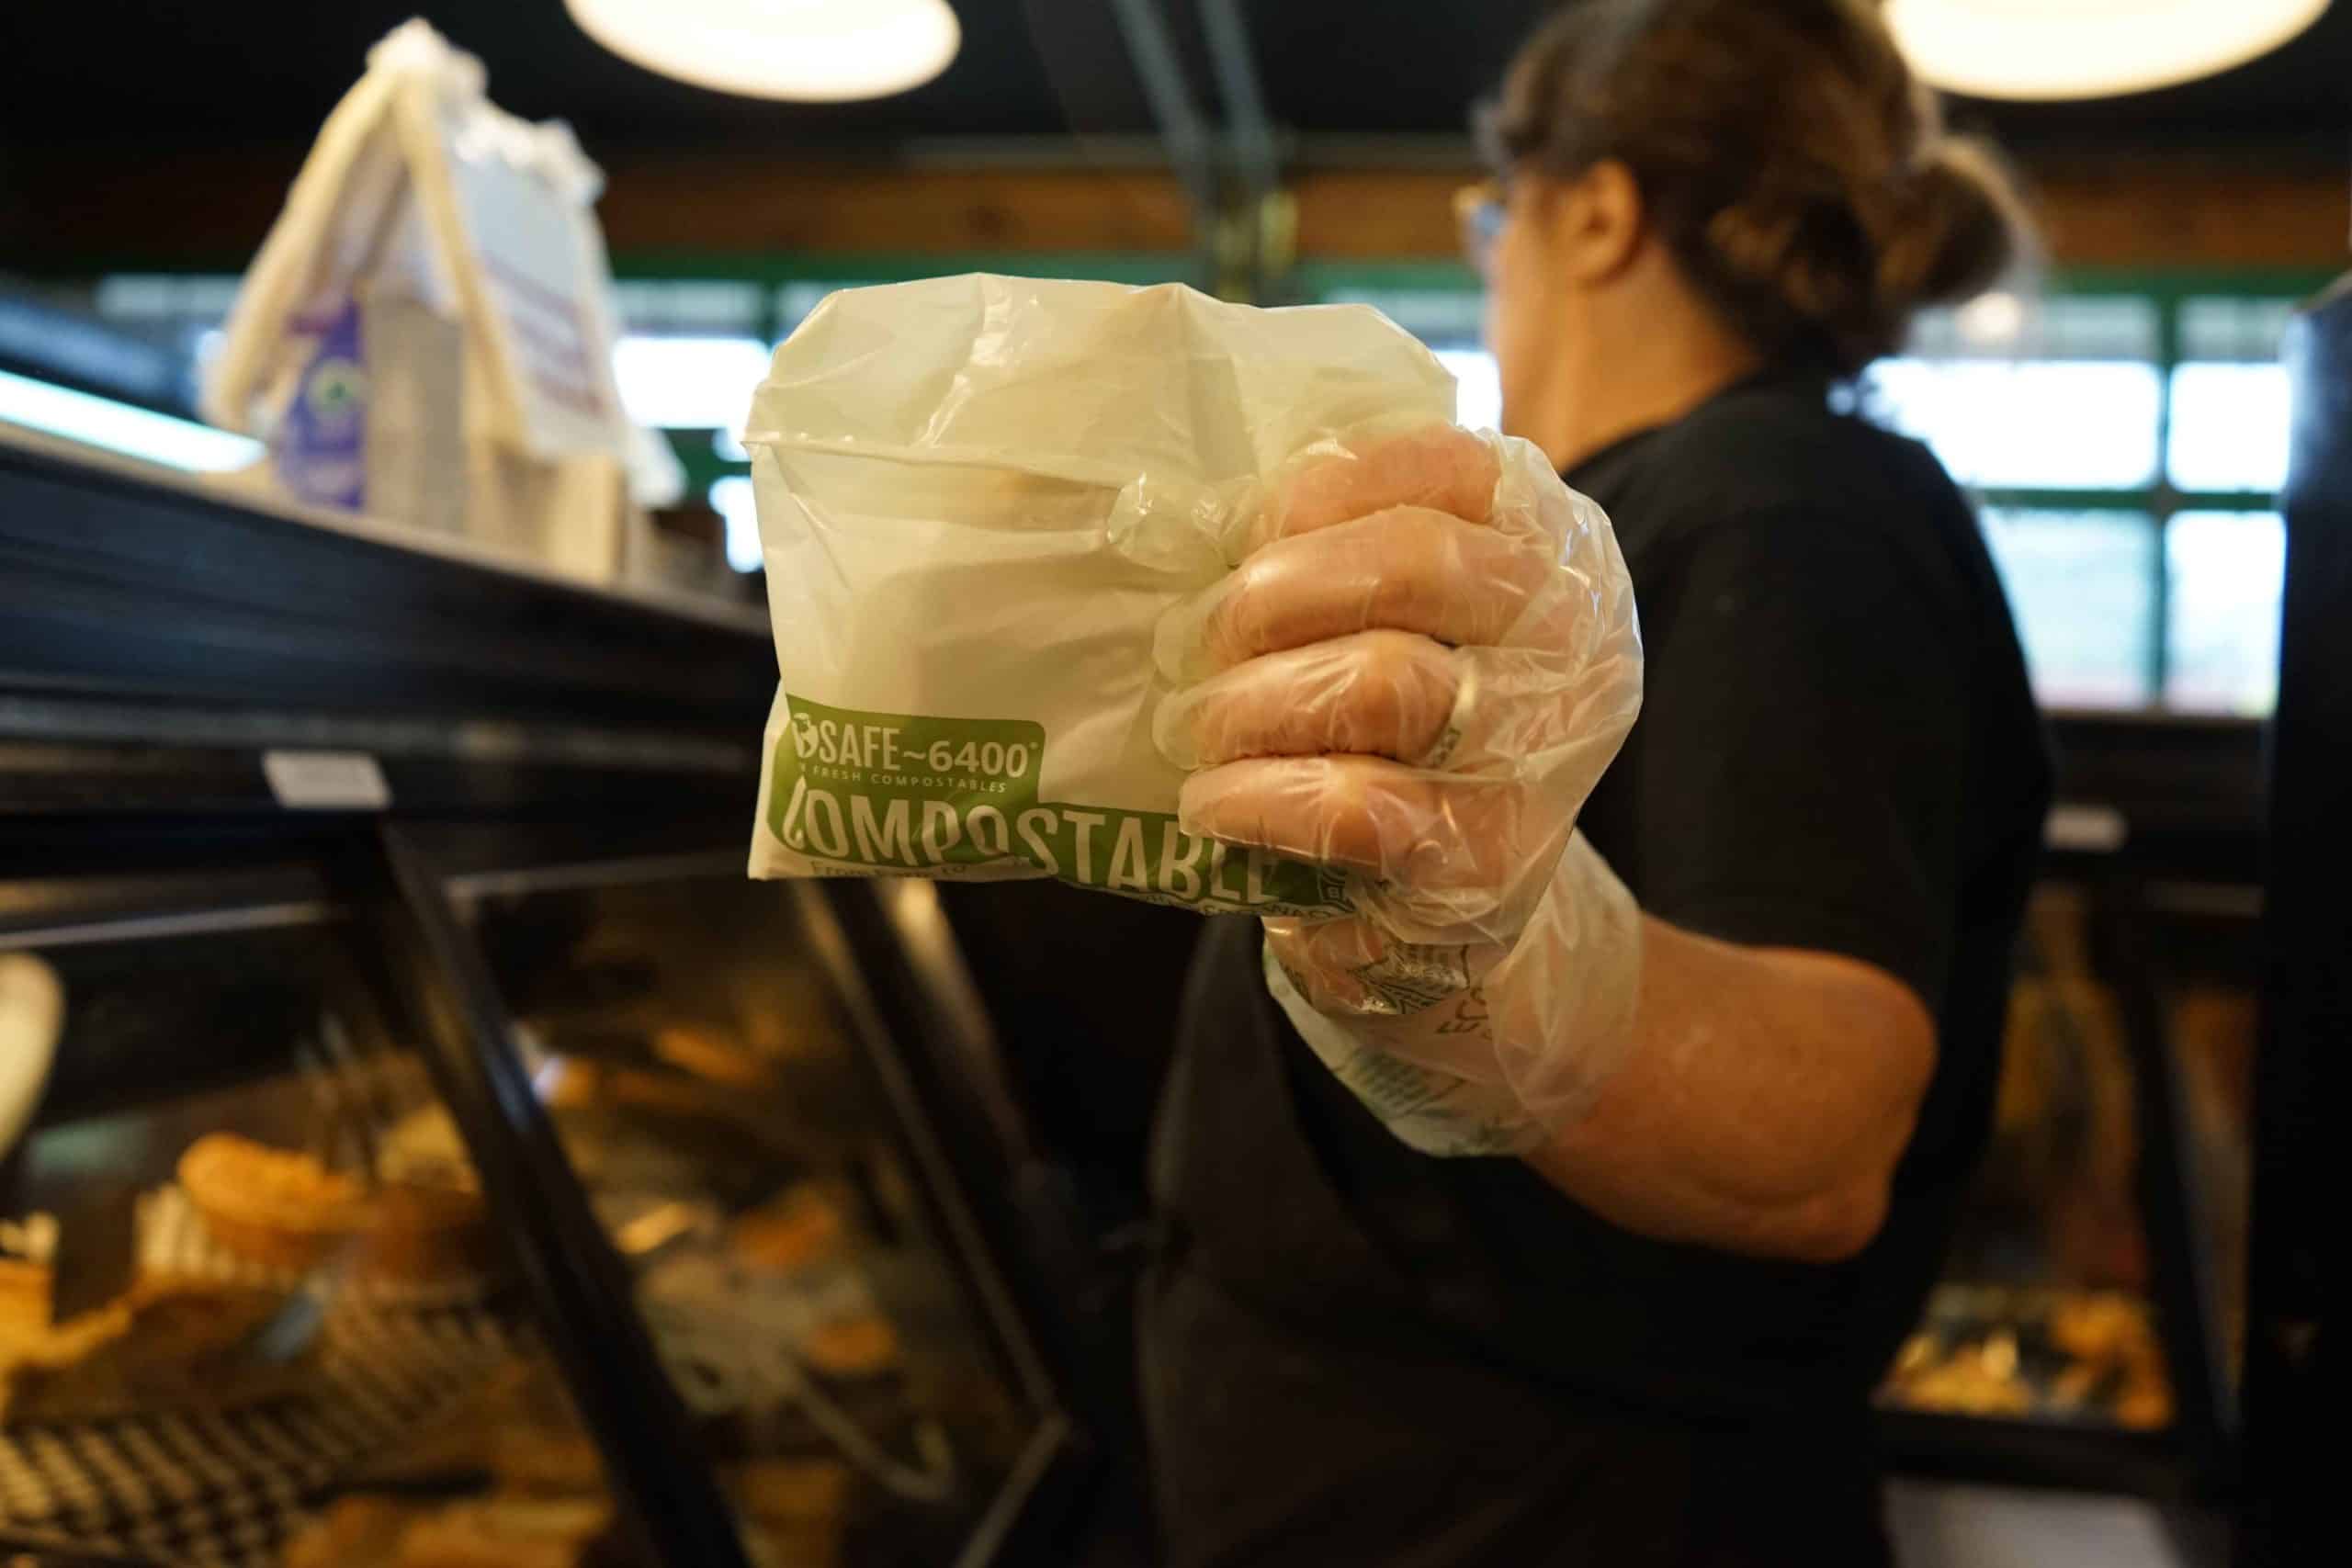 Person at deli holding compostable fold top bag